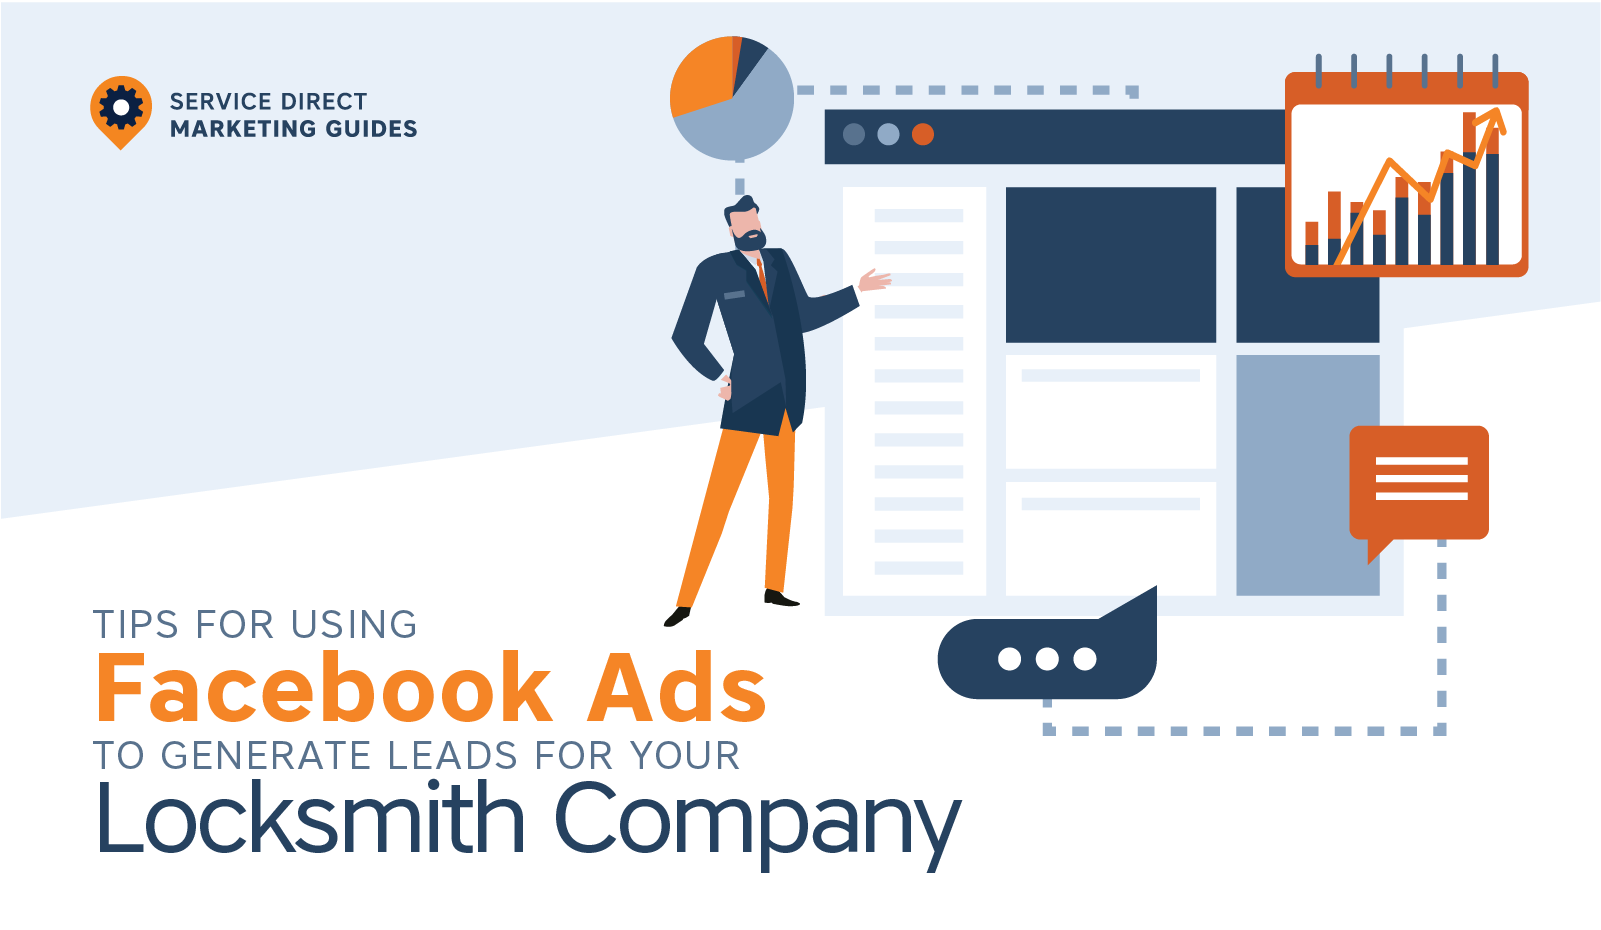 Tips for Using Facebook Ads to Generate Leads for Your Locksmith Company